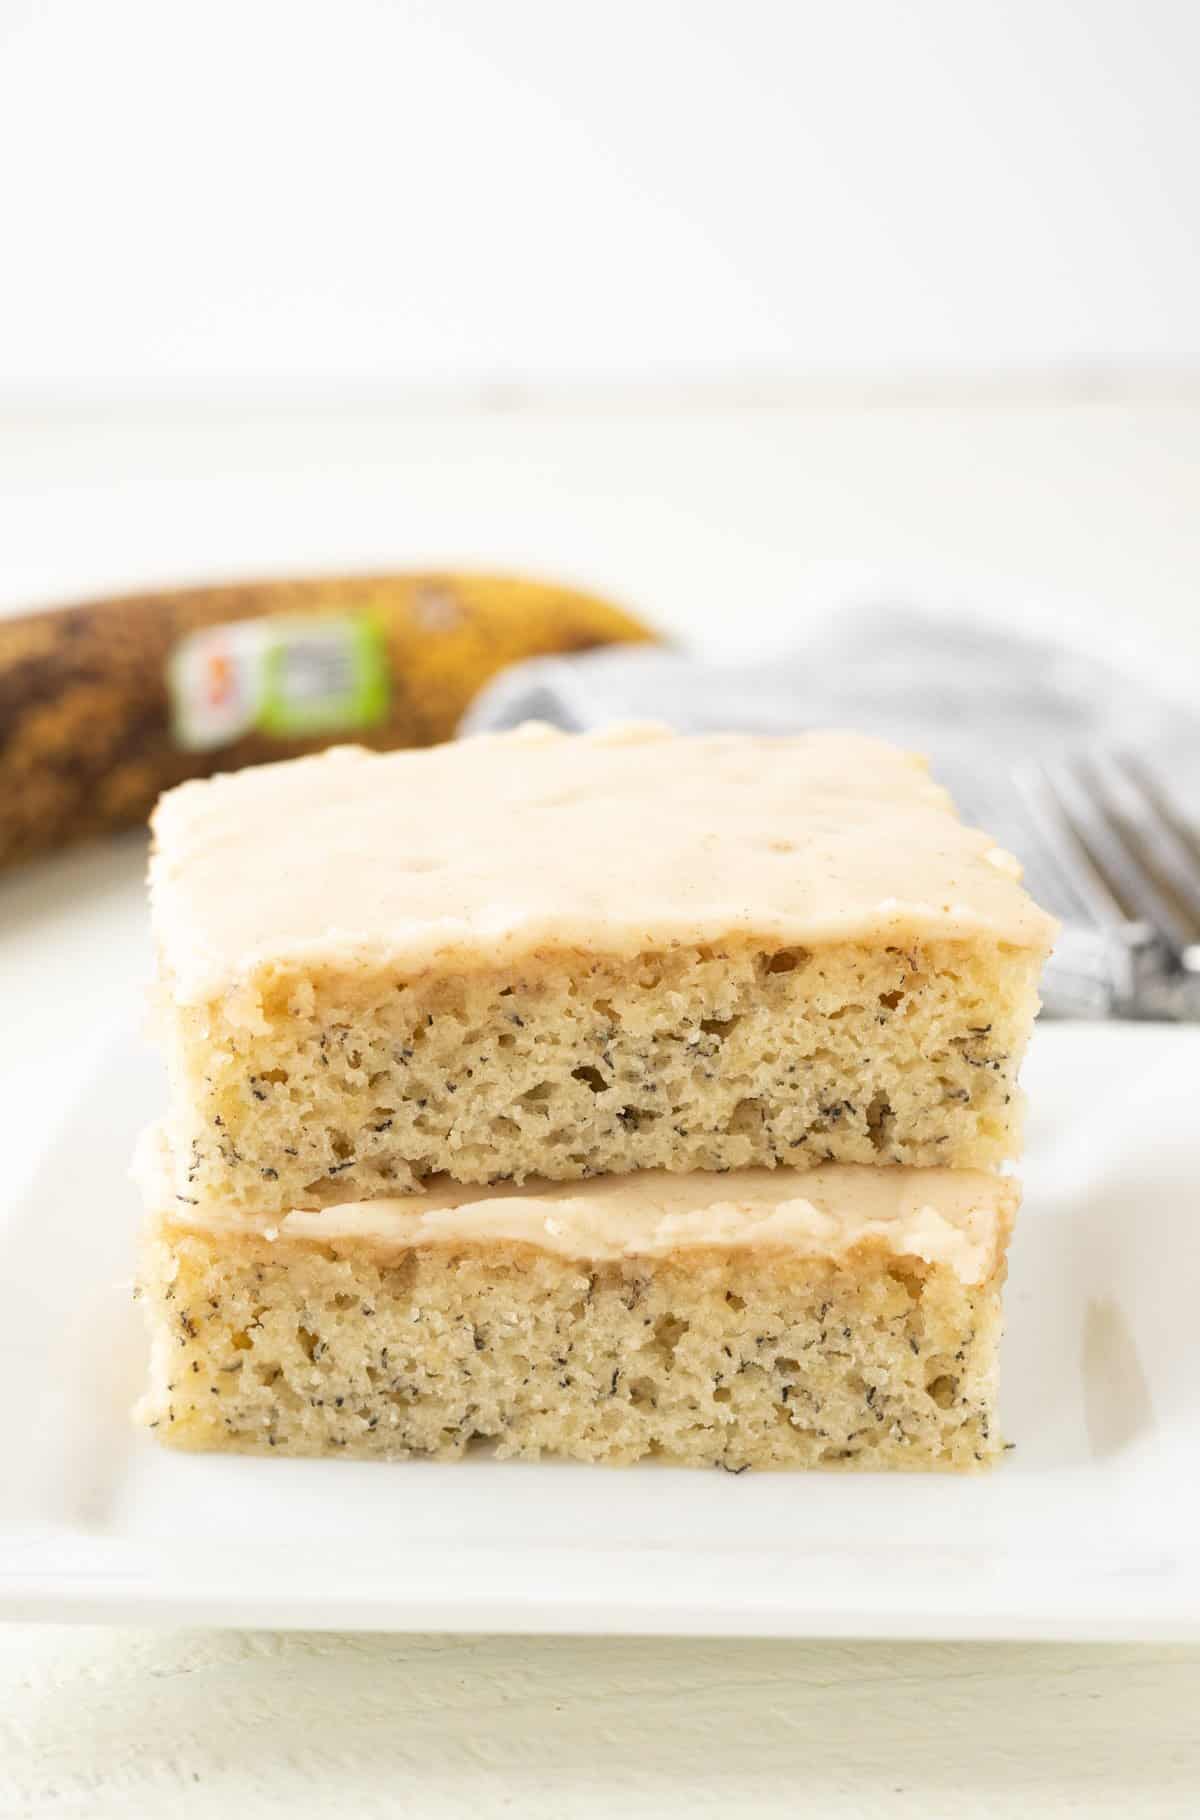 Banana bars cut into square and frosted with cream cheese icing on a plate.